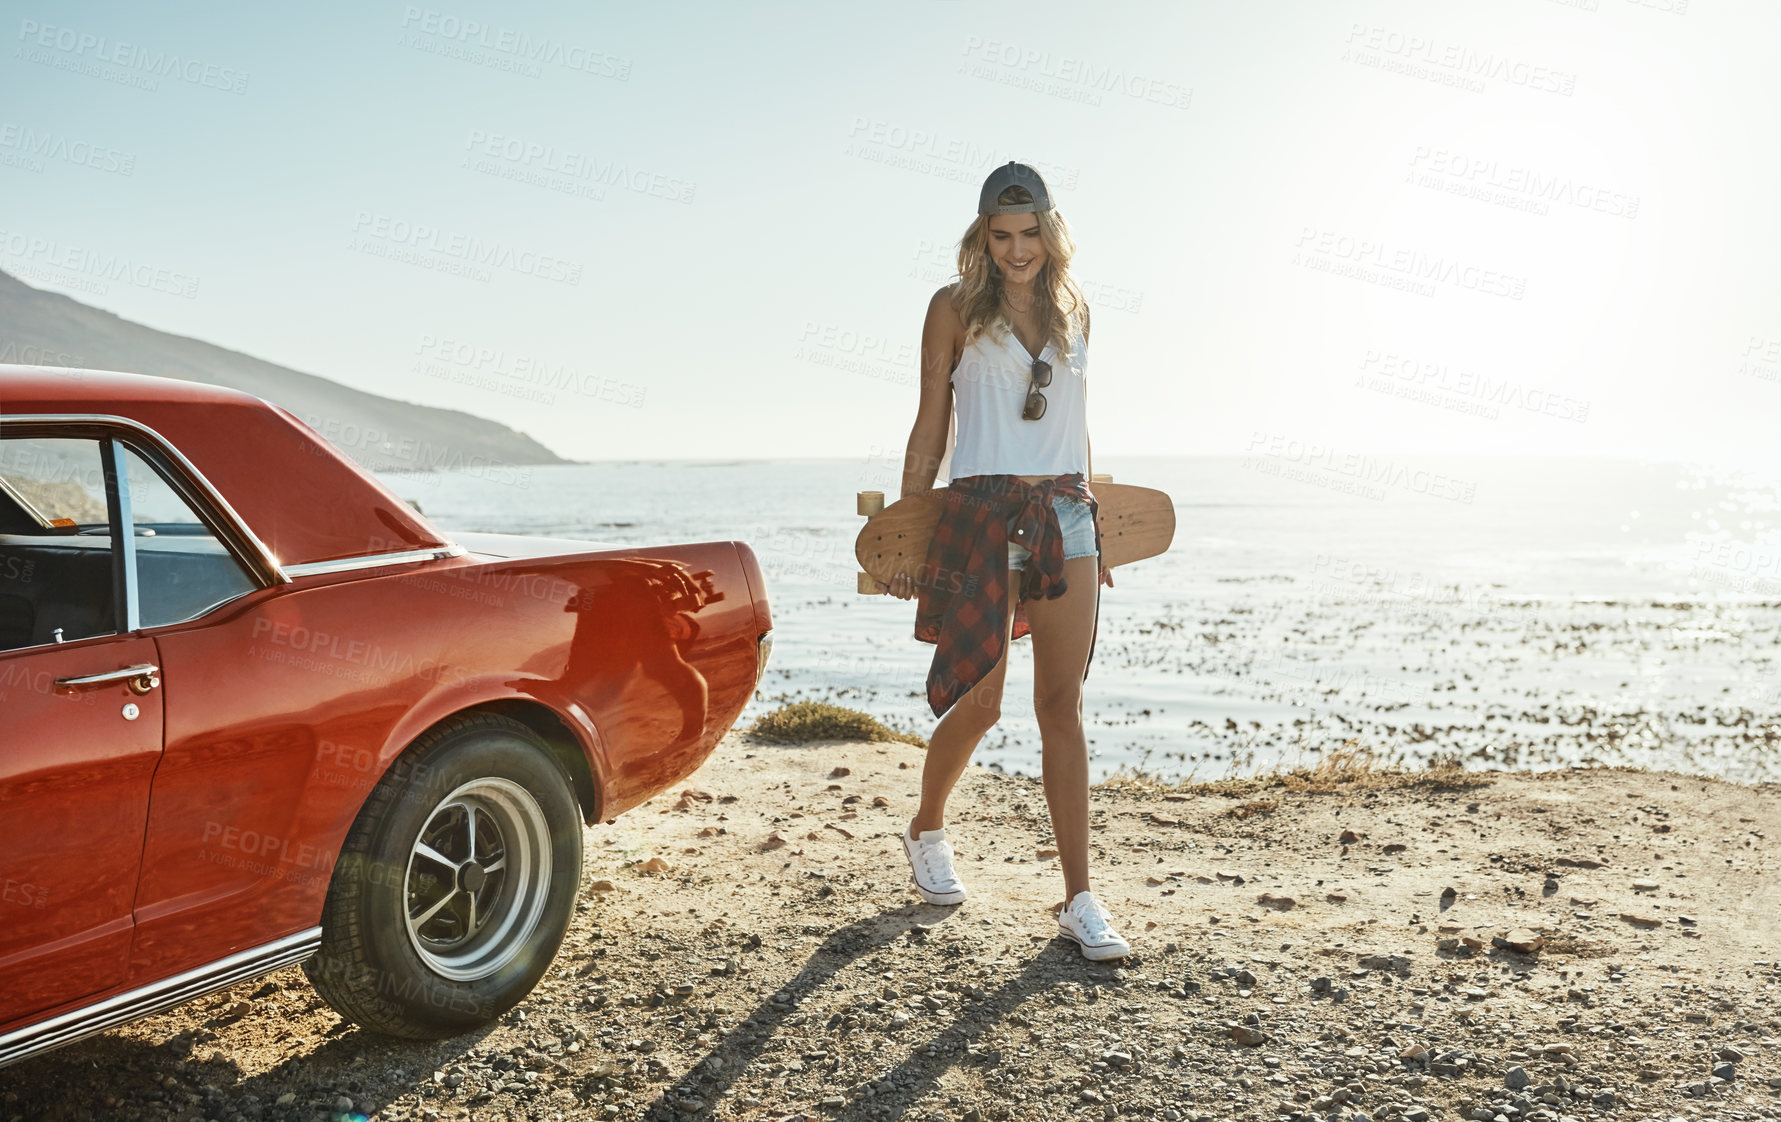 Buy stock photo Shot of an attractive young woman holding a skateboard while on a road trip